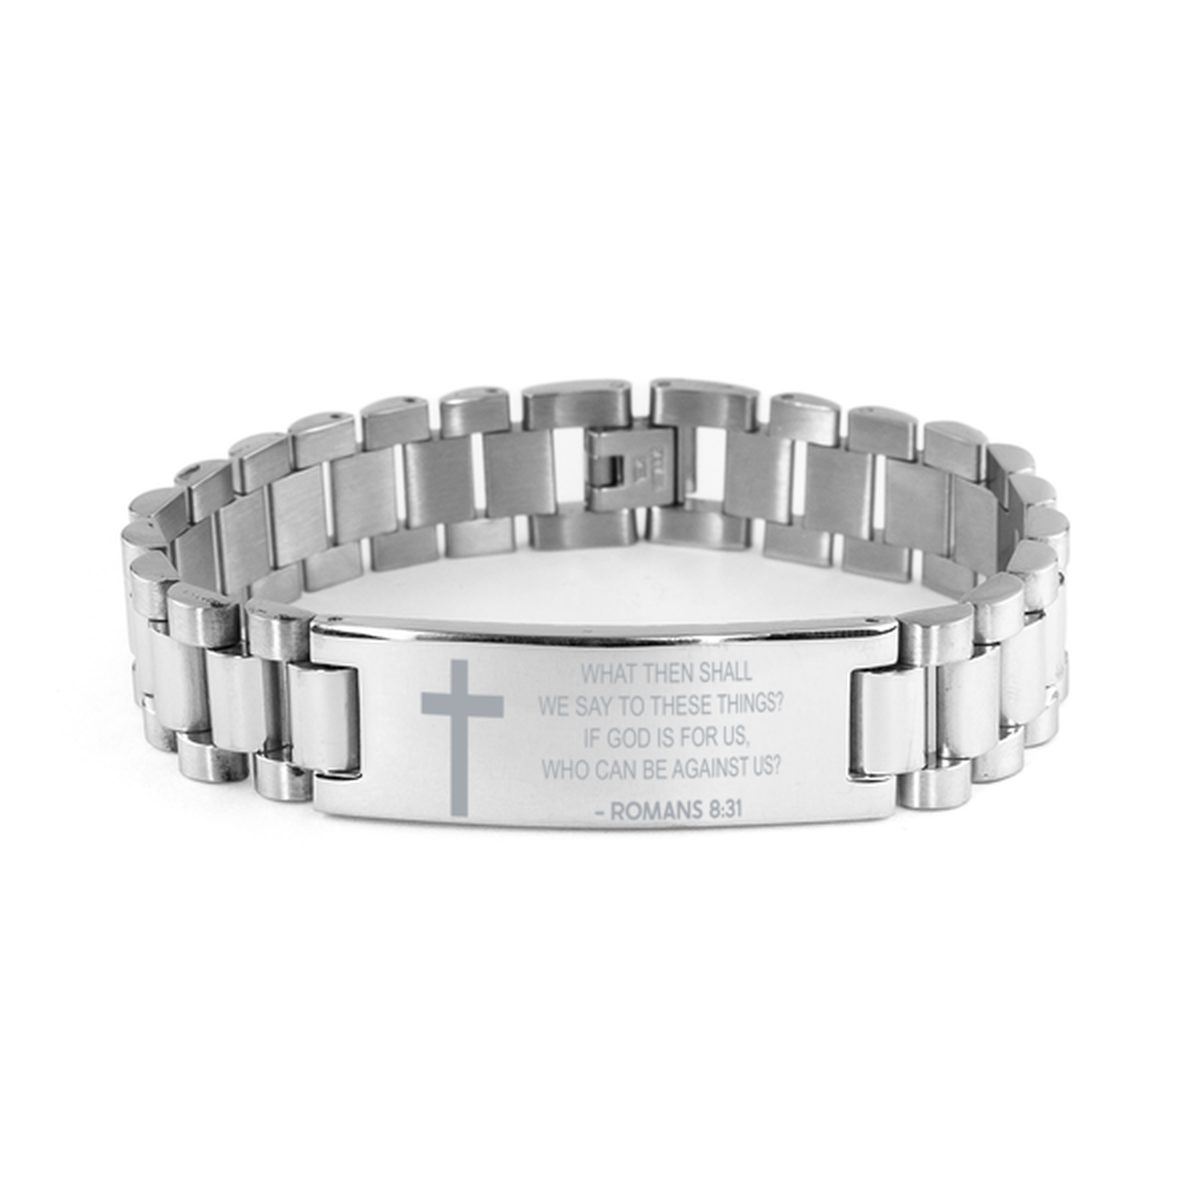 Christian Ladder Stainless Steel Bracelet, Romans 8:31 What Then Shall We Say To These Things? If God Is, Motivational Bible Verse Gifts For Men Women